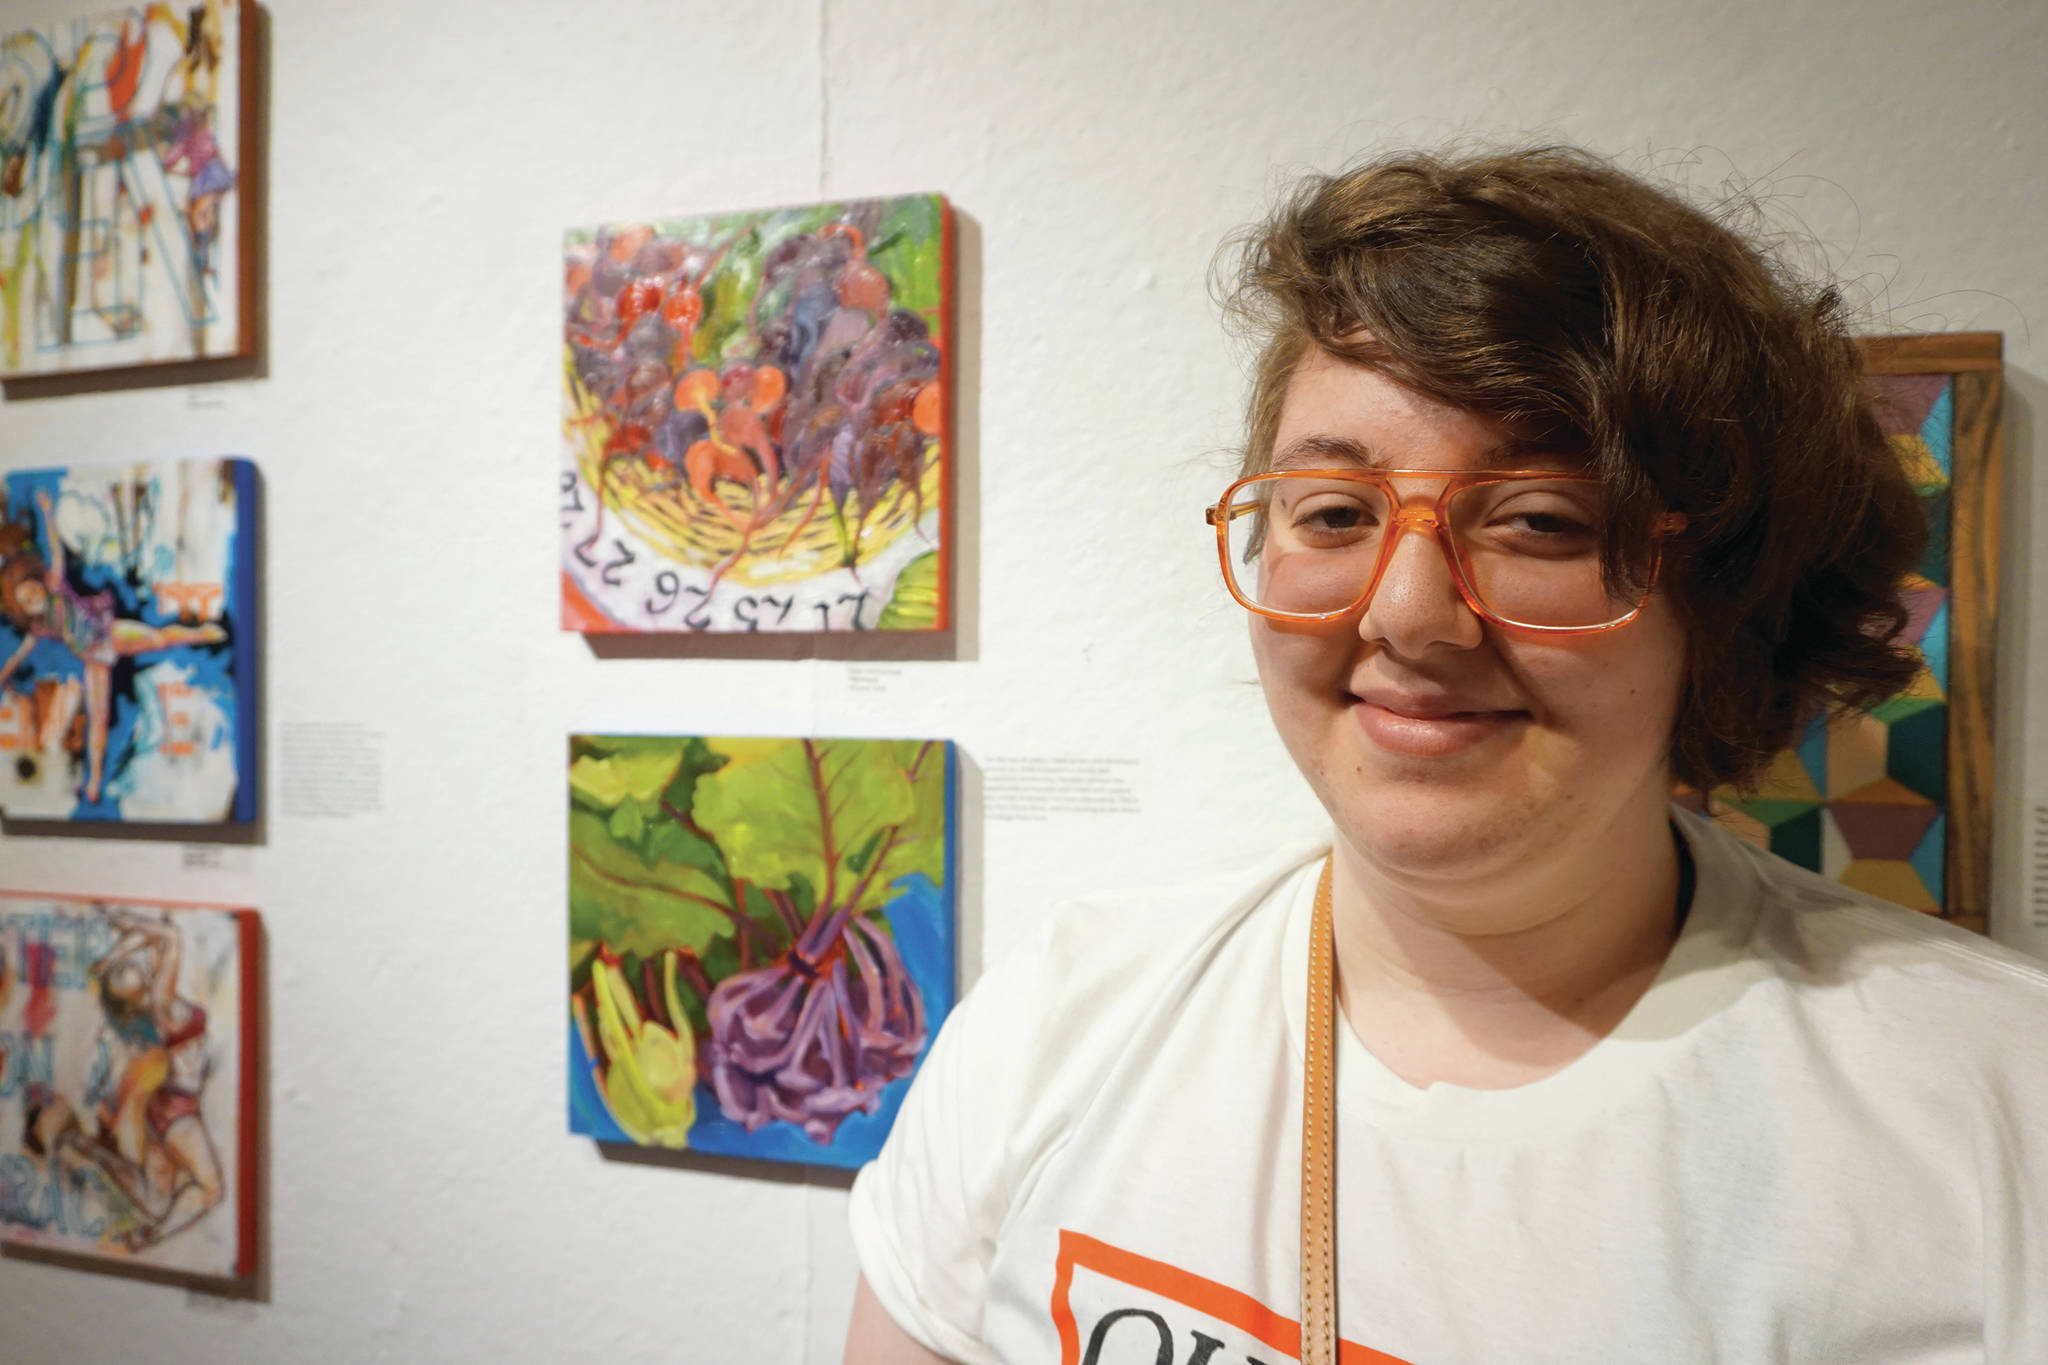 Drew Wimmerstedt stands by two of her works in the 10x10 show at Bunnell Street Arts Center that opened on Nov. 8, 2019, in Homer, Alaska. (Photo by Michael Armstrong/Homer News)